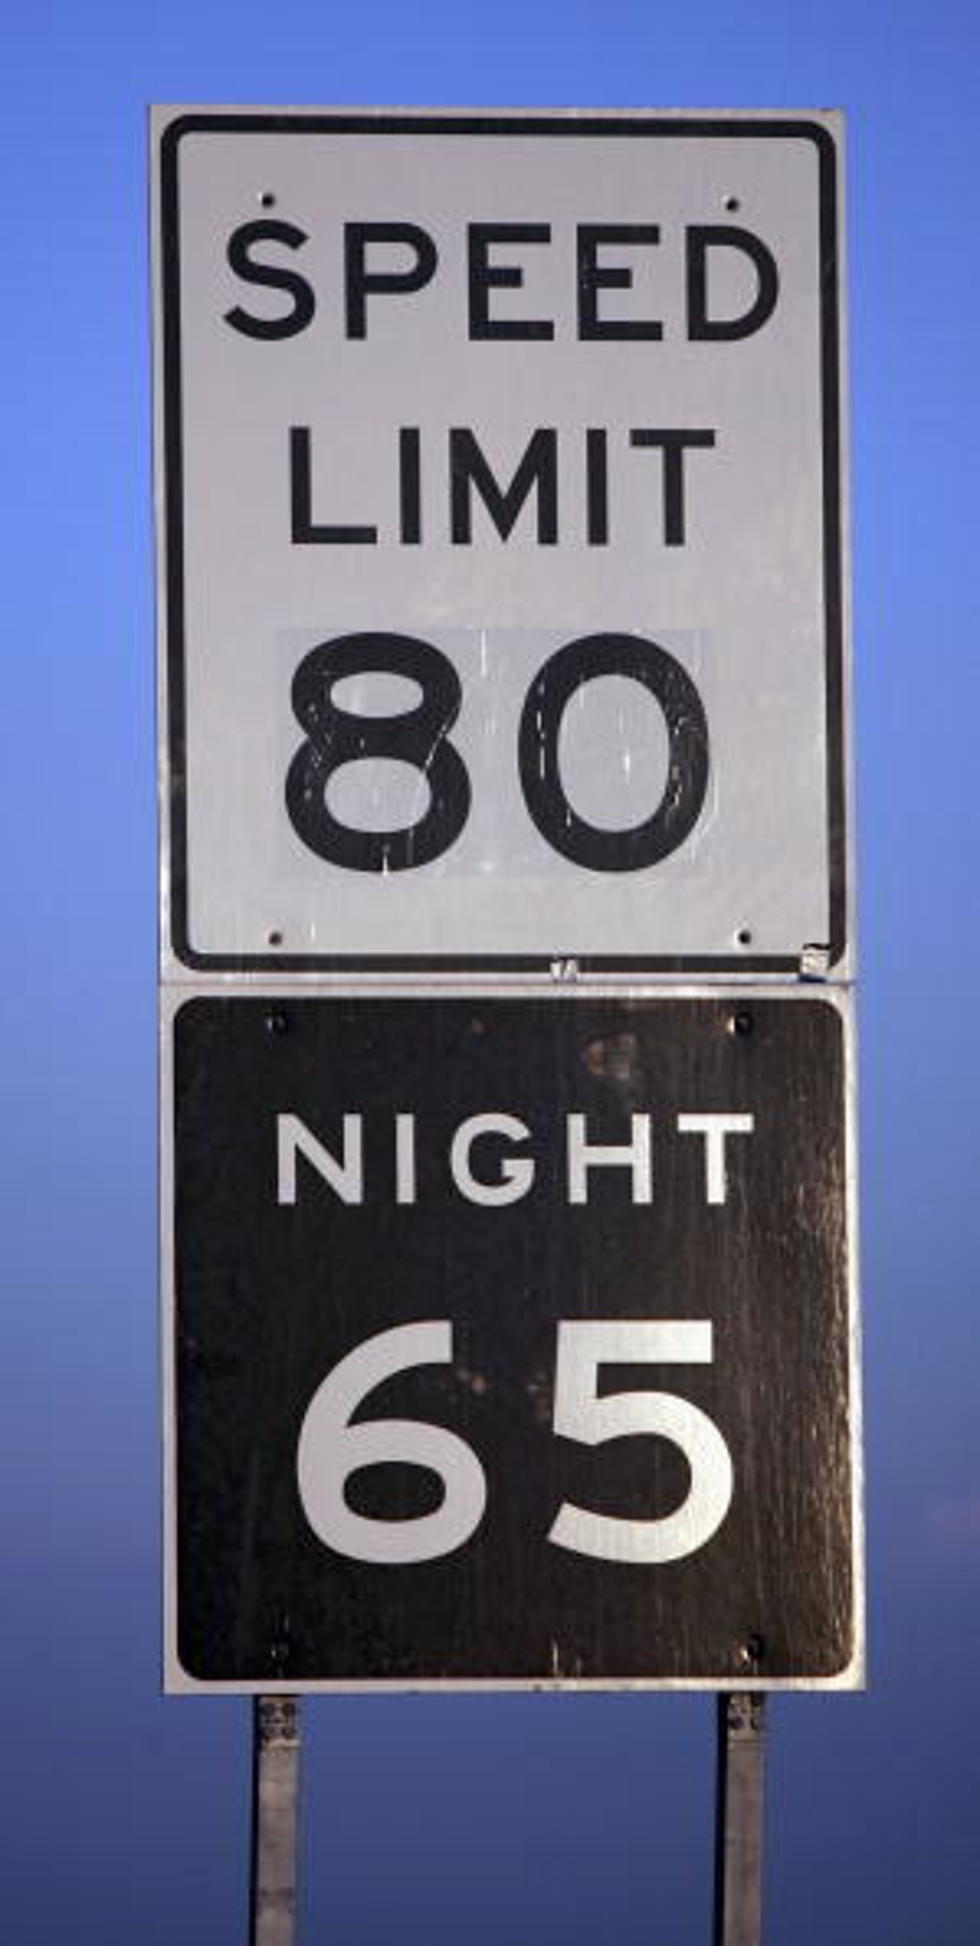 Fastest Speed Limit In The Nation – House May Approve 85 MPH Speed Limit In Texas